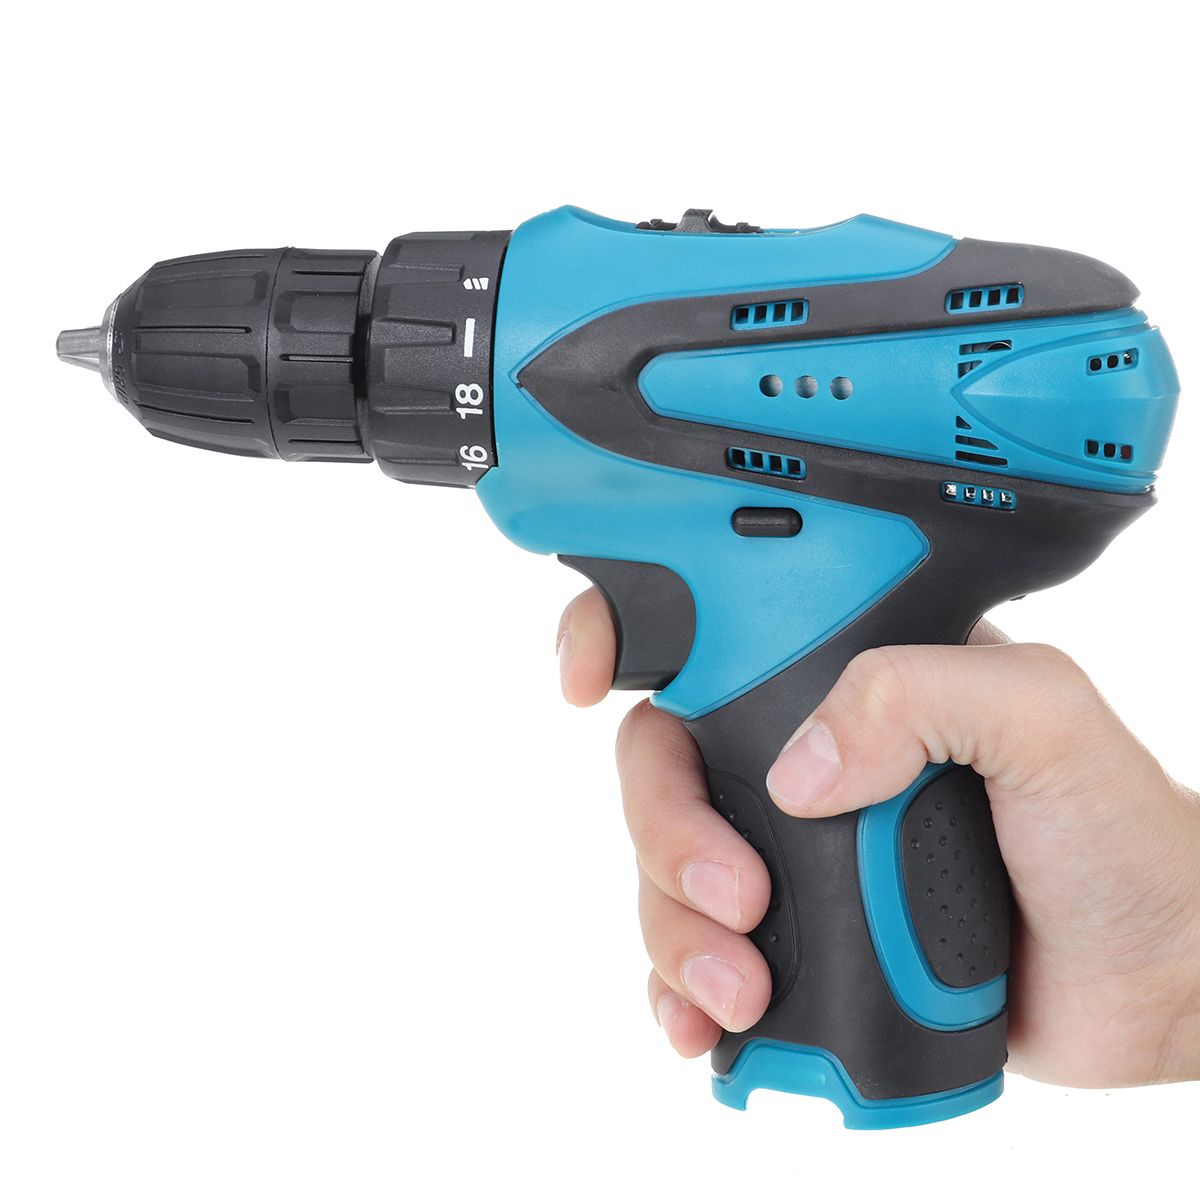 12V-2-Speeds-Cordless-Electric-Drill-18-Torque-Adjustment-Wood-Steel-Drilling-Tool-Without-Battery-1740706